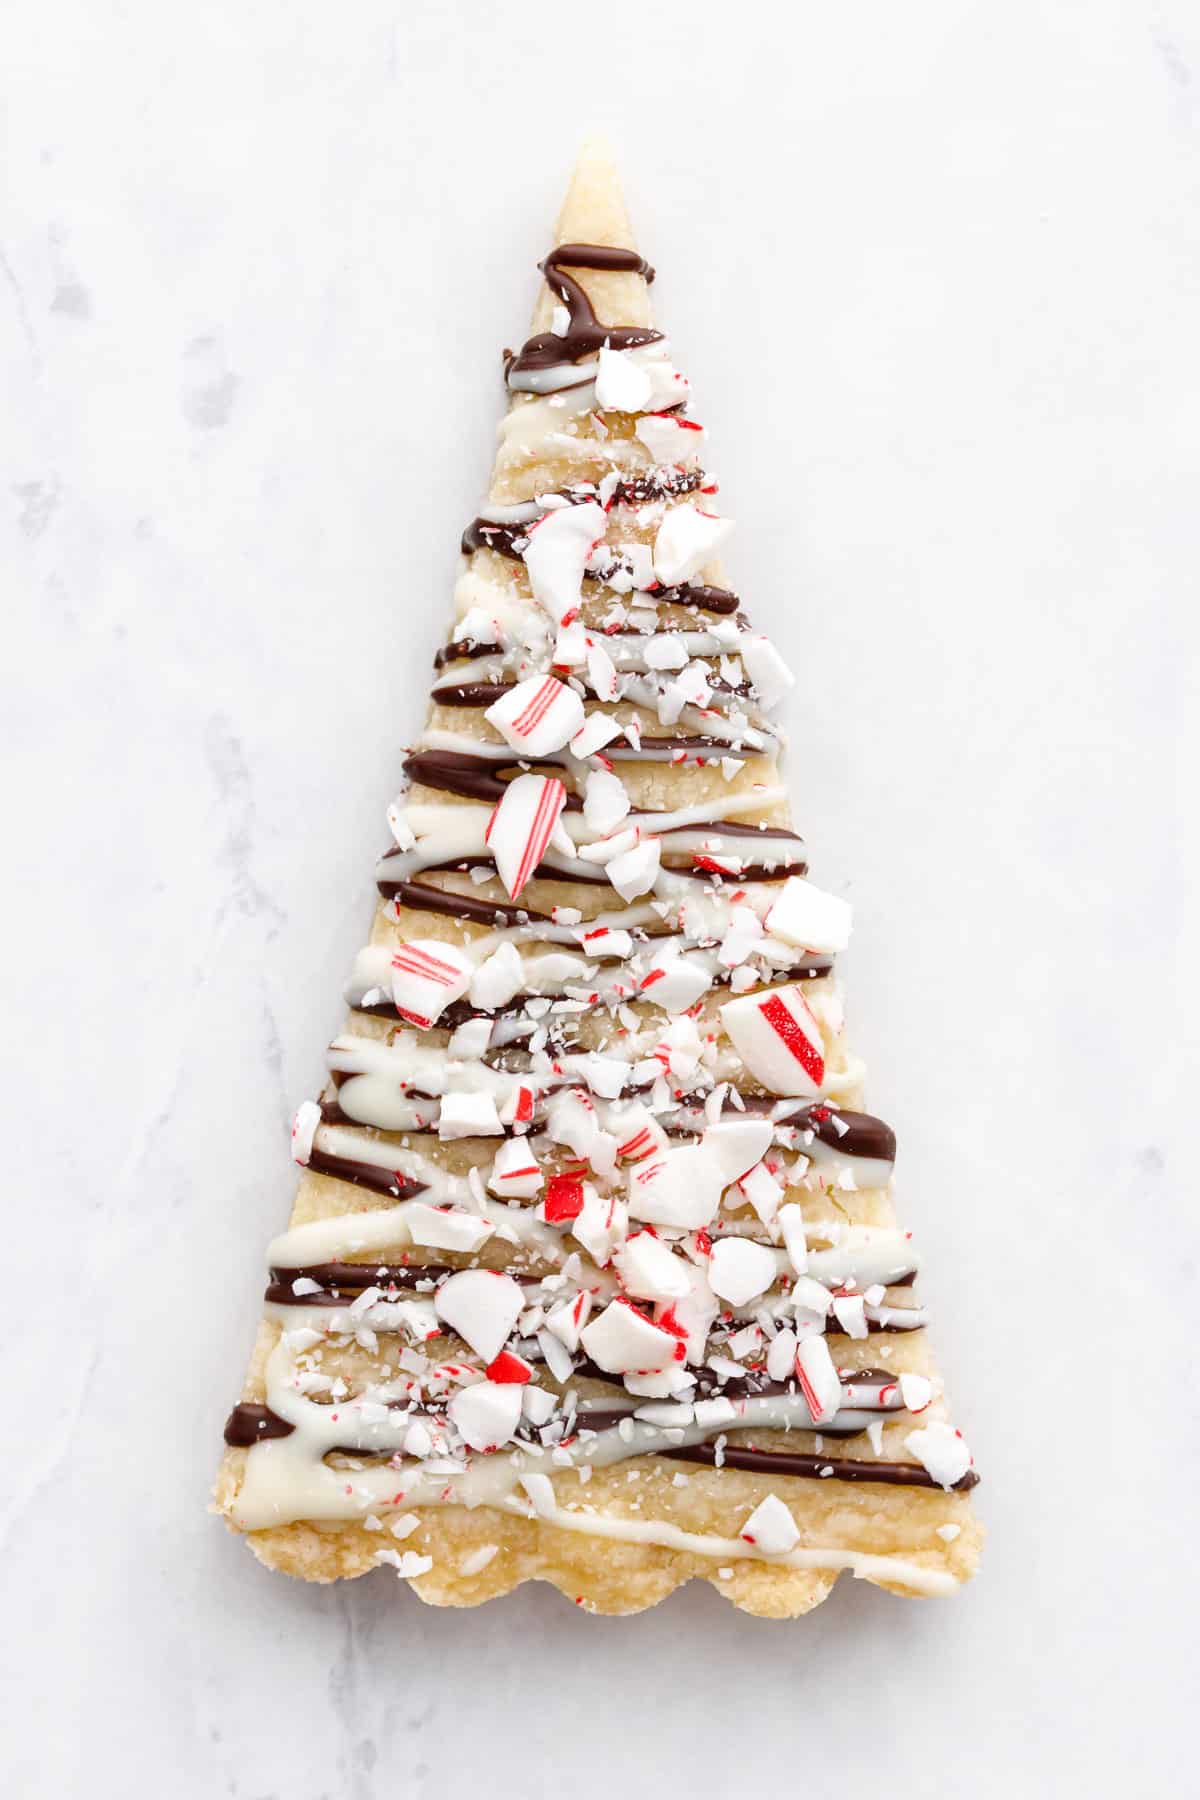 Peppermint Bark Shortbread cut into triangles to look like Christmas trees, decorated with drizzled white and dark chocolate and crushed candy canes.